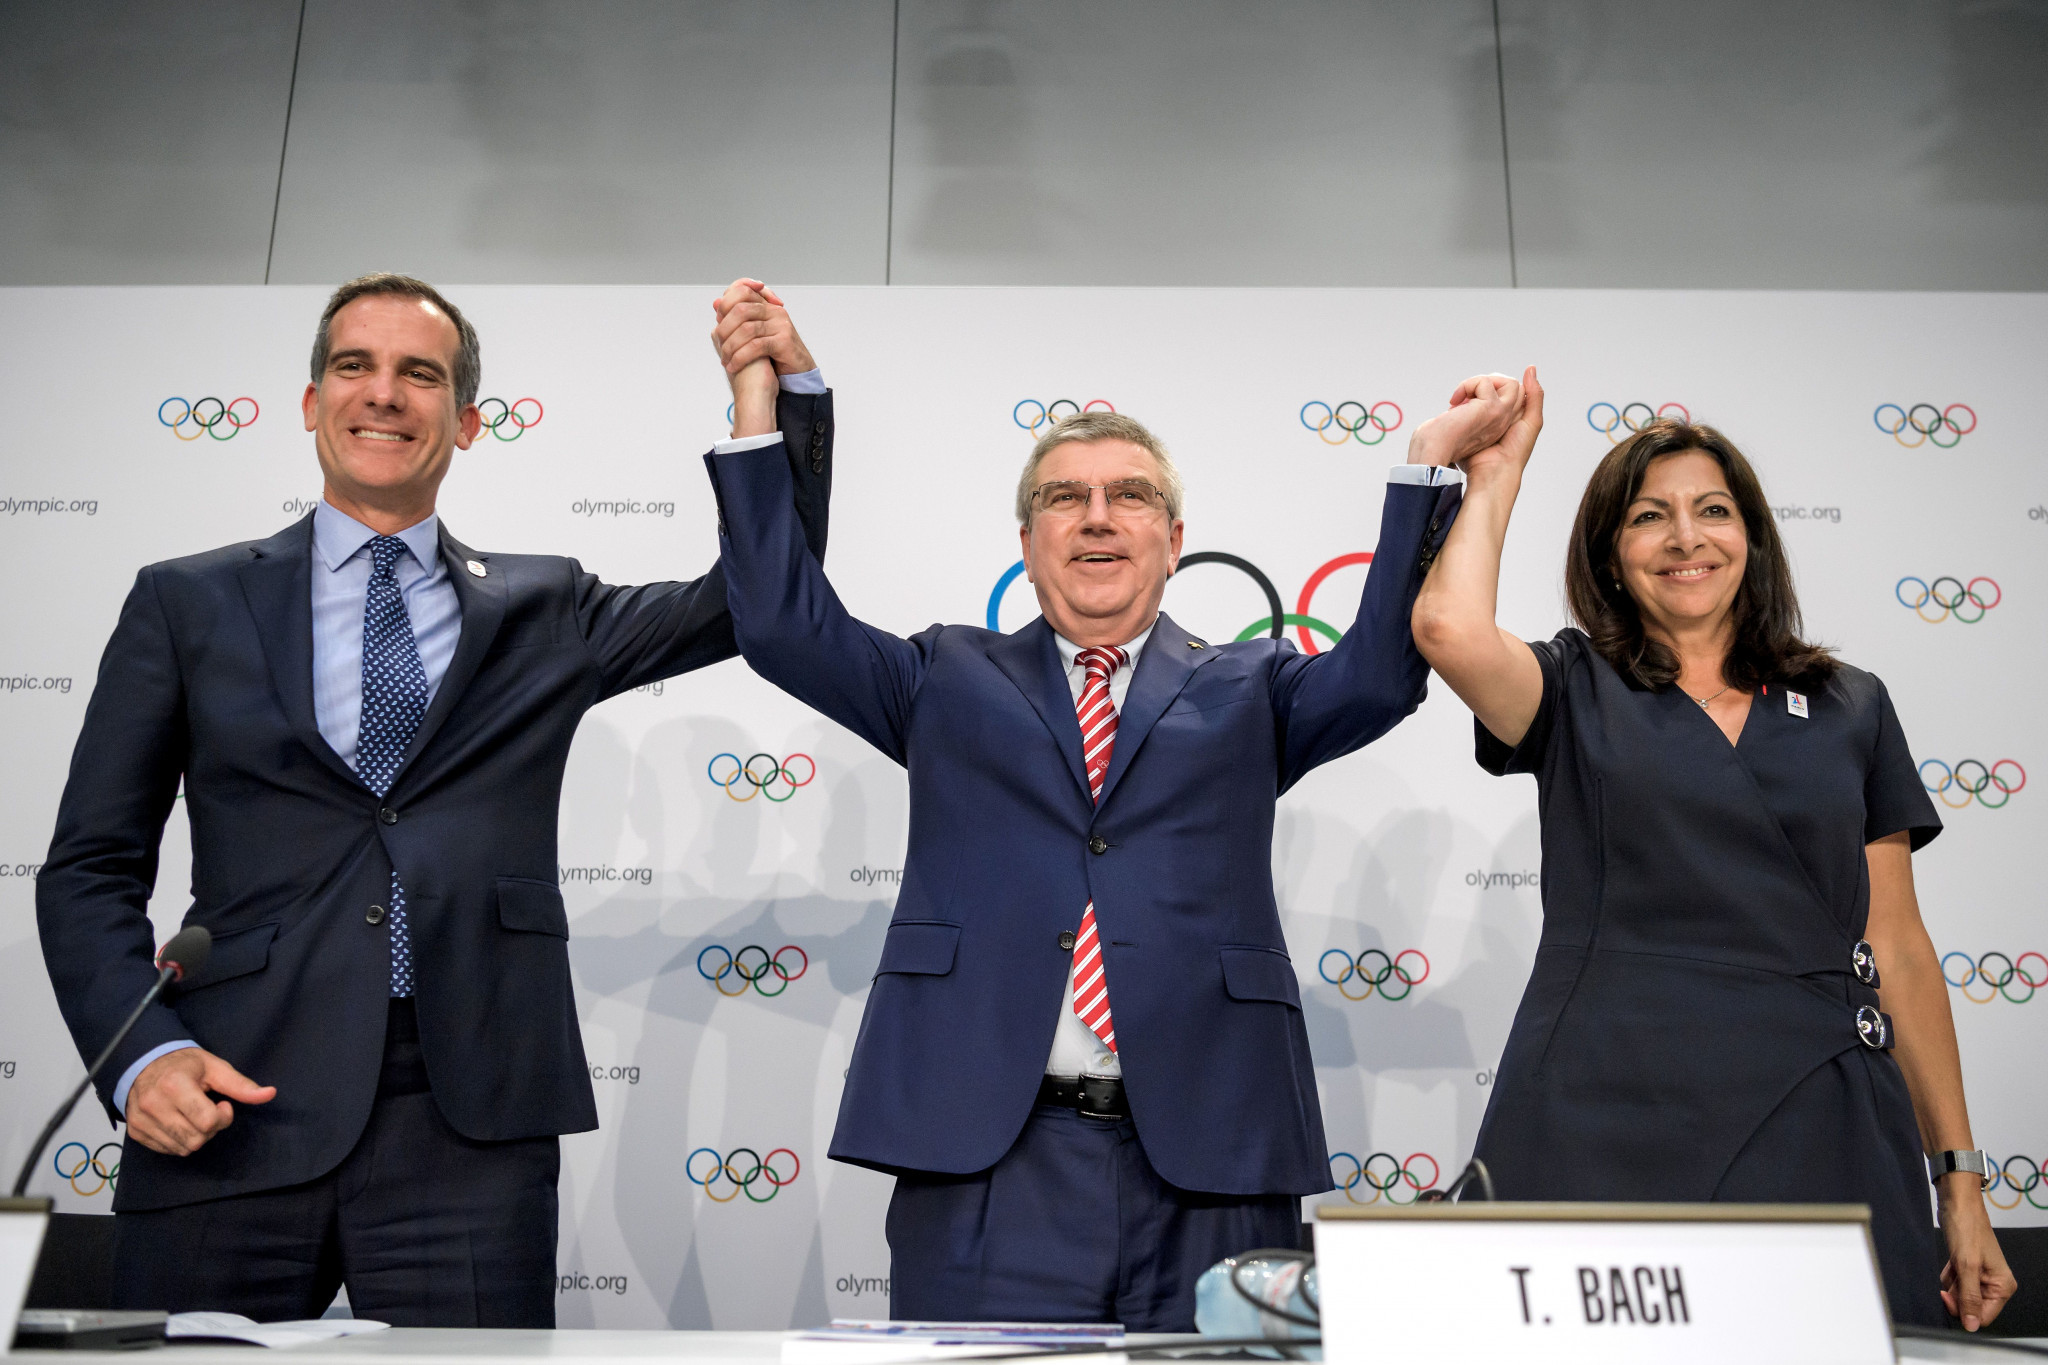 Thomas Bach pictured with Los Angeles Mayor Eric Garcetti, left, and Paris counterpart Anne Hidalgo, right, are both set to be in Lima to confirm their cities being awarded the Olympic and Paralympic Games in 2024 and 2028 ©Getty Images